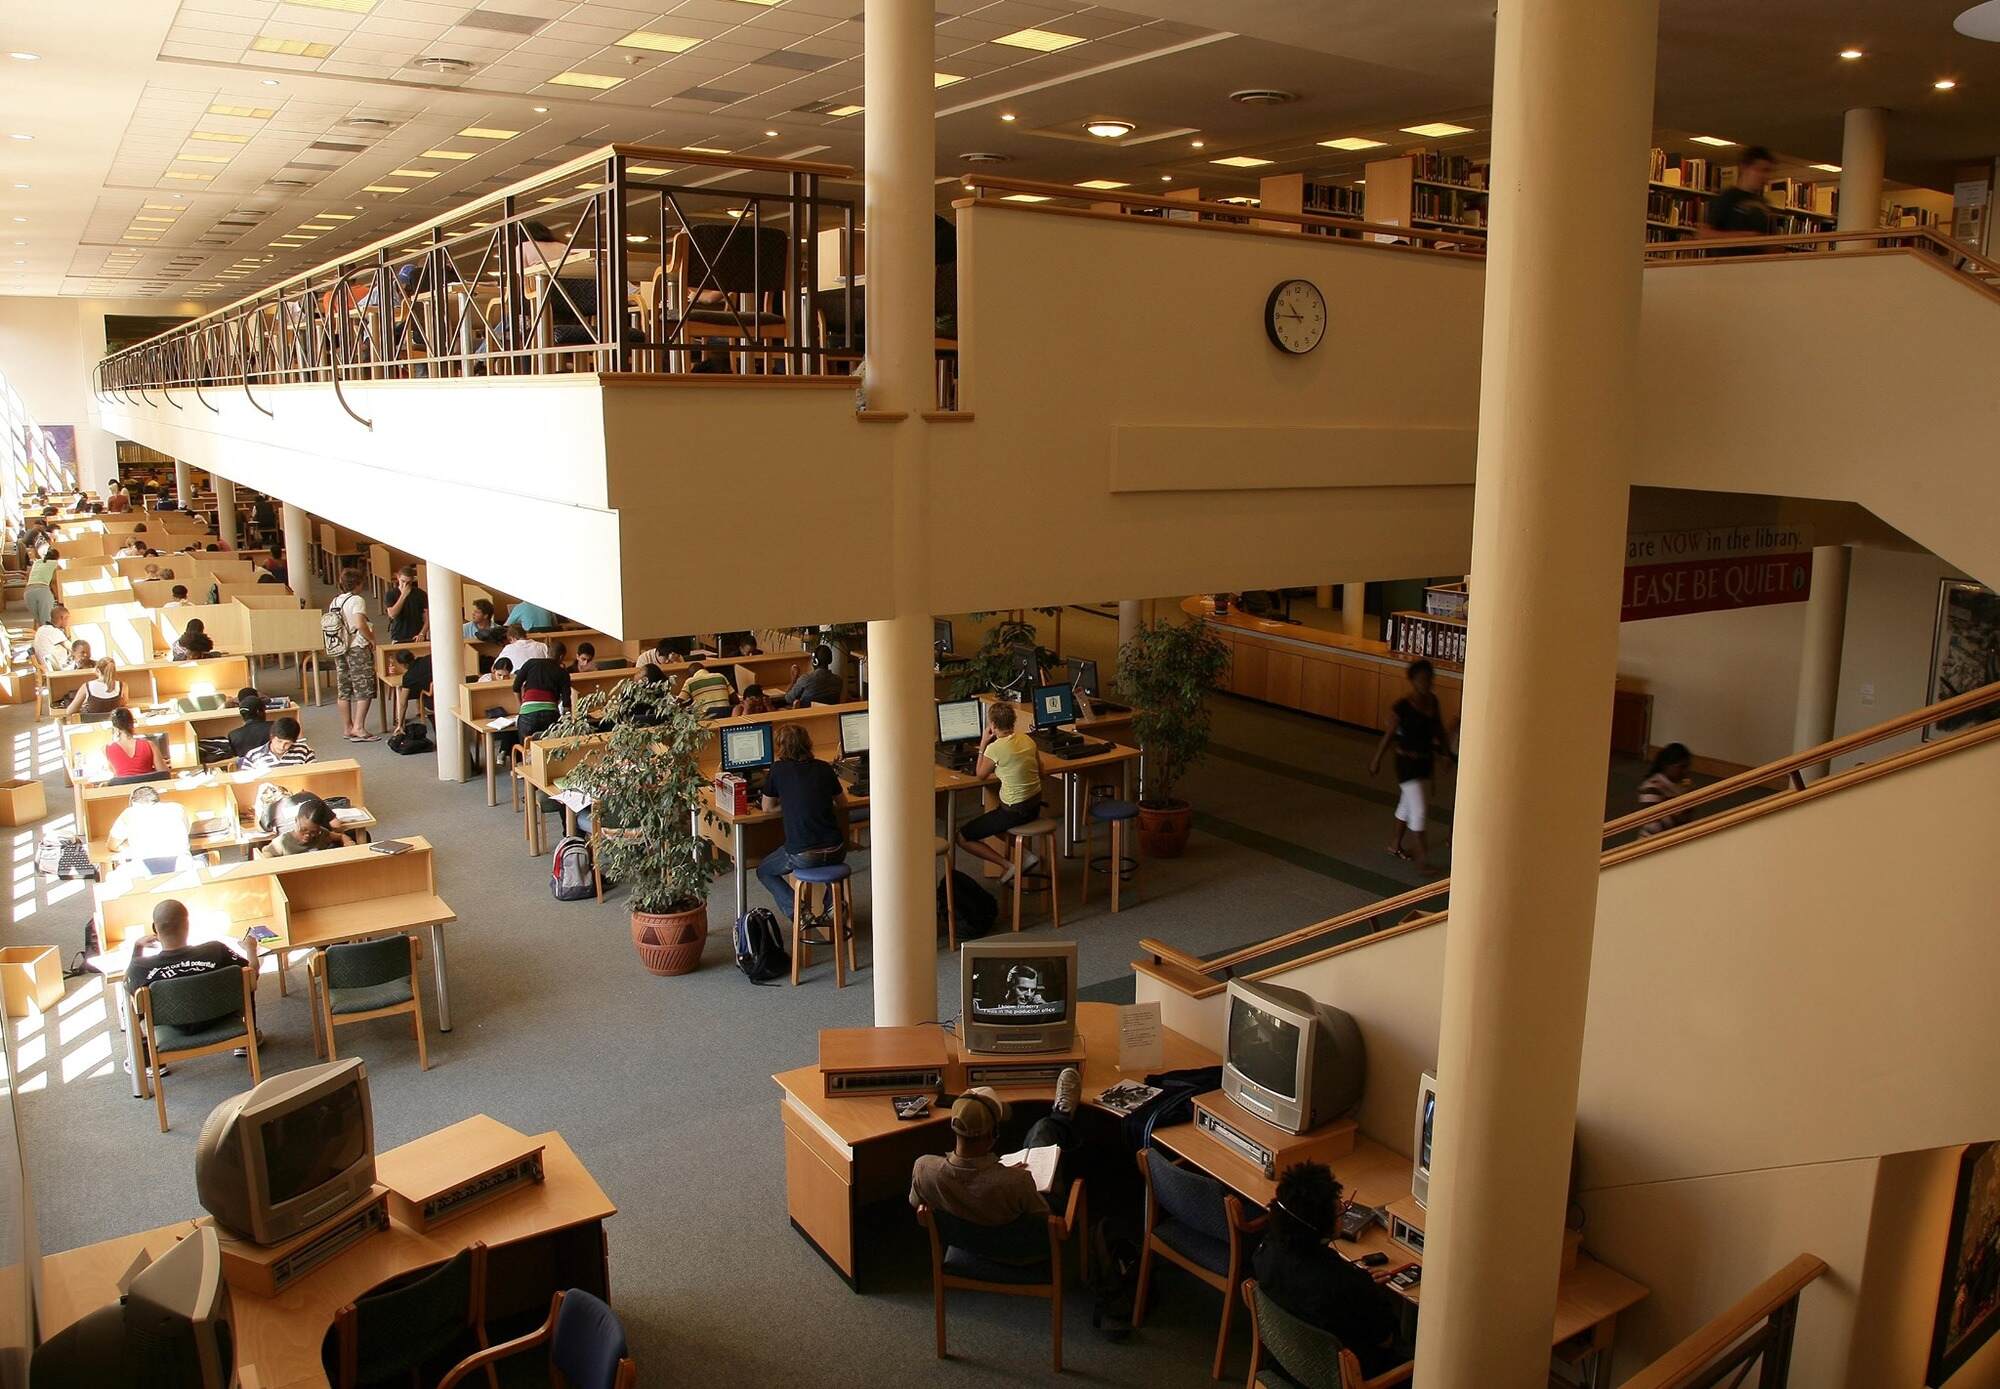 20-astounding-facts-about-the-university-of-cape-town-libraries